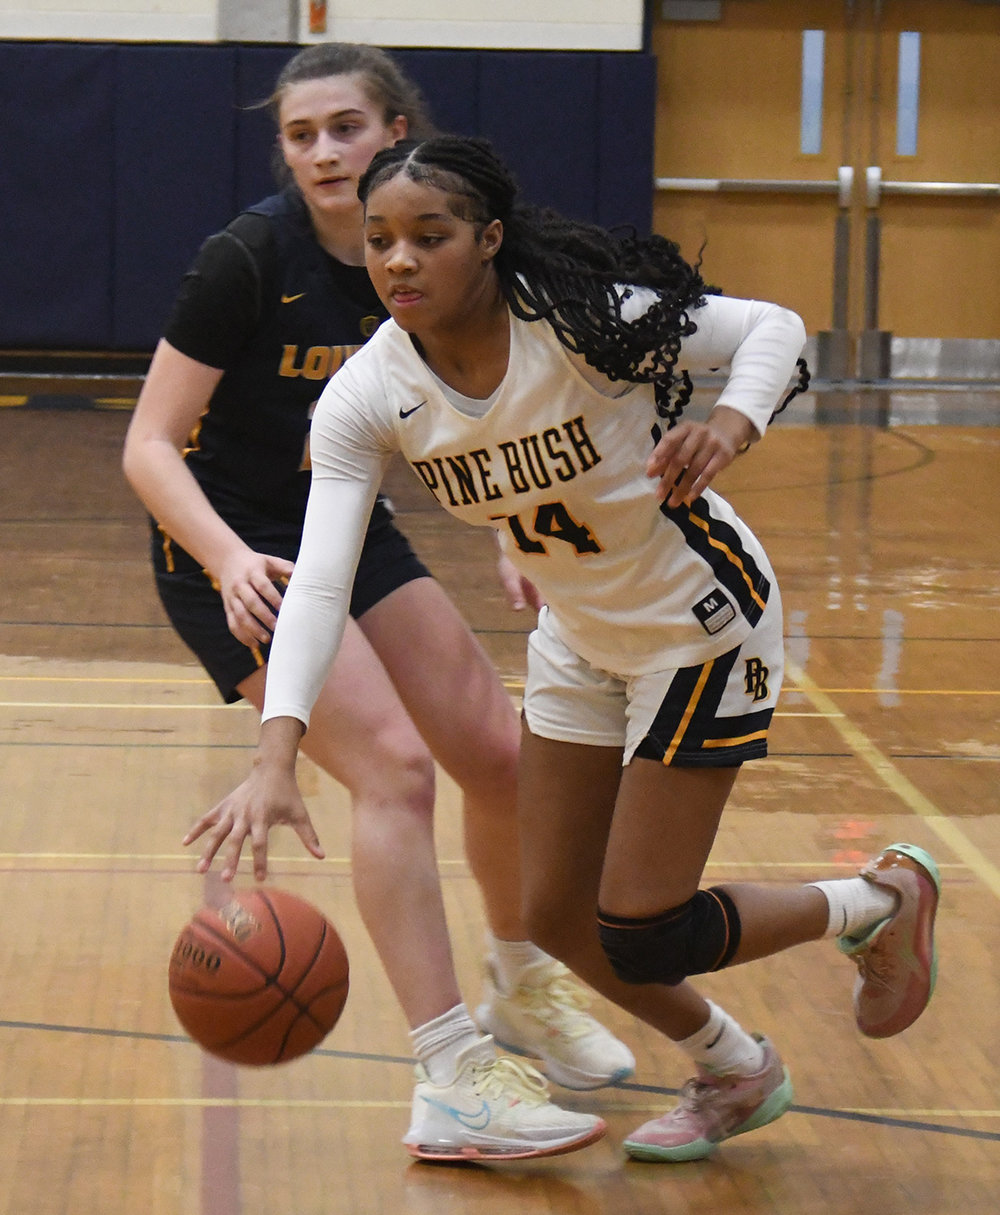 Pine Bush's Ketura Rutty drives past Our Lady of Lourdes' Simone Pelish during Saturday's Section 9 Class AA quarterfinal girls' basketball game at Pine Bush High School.